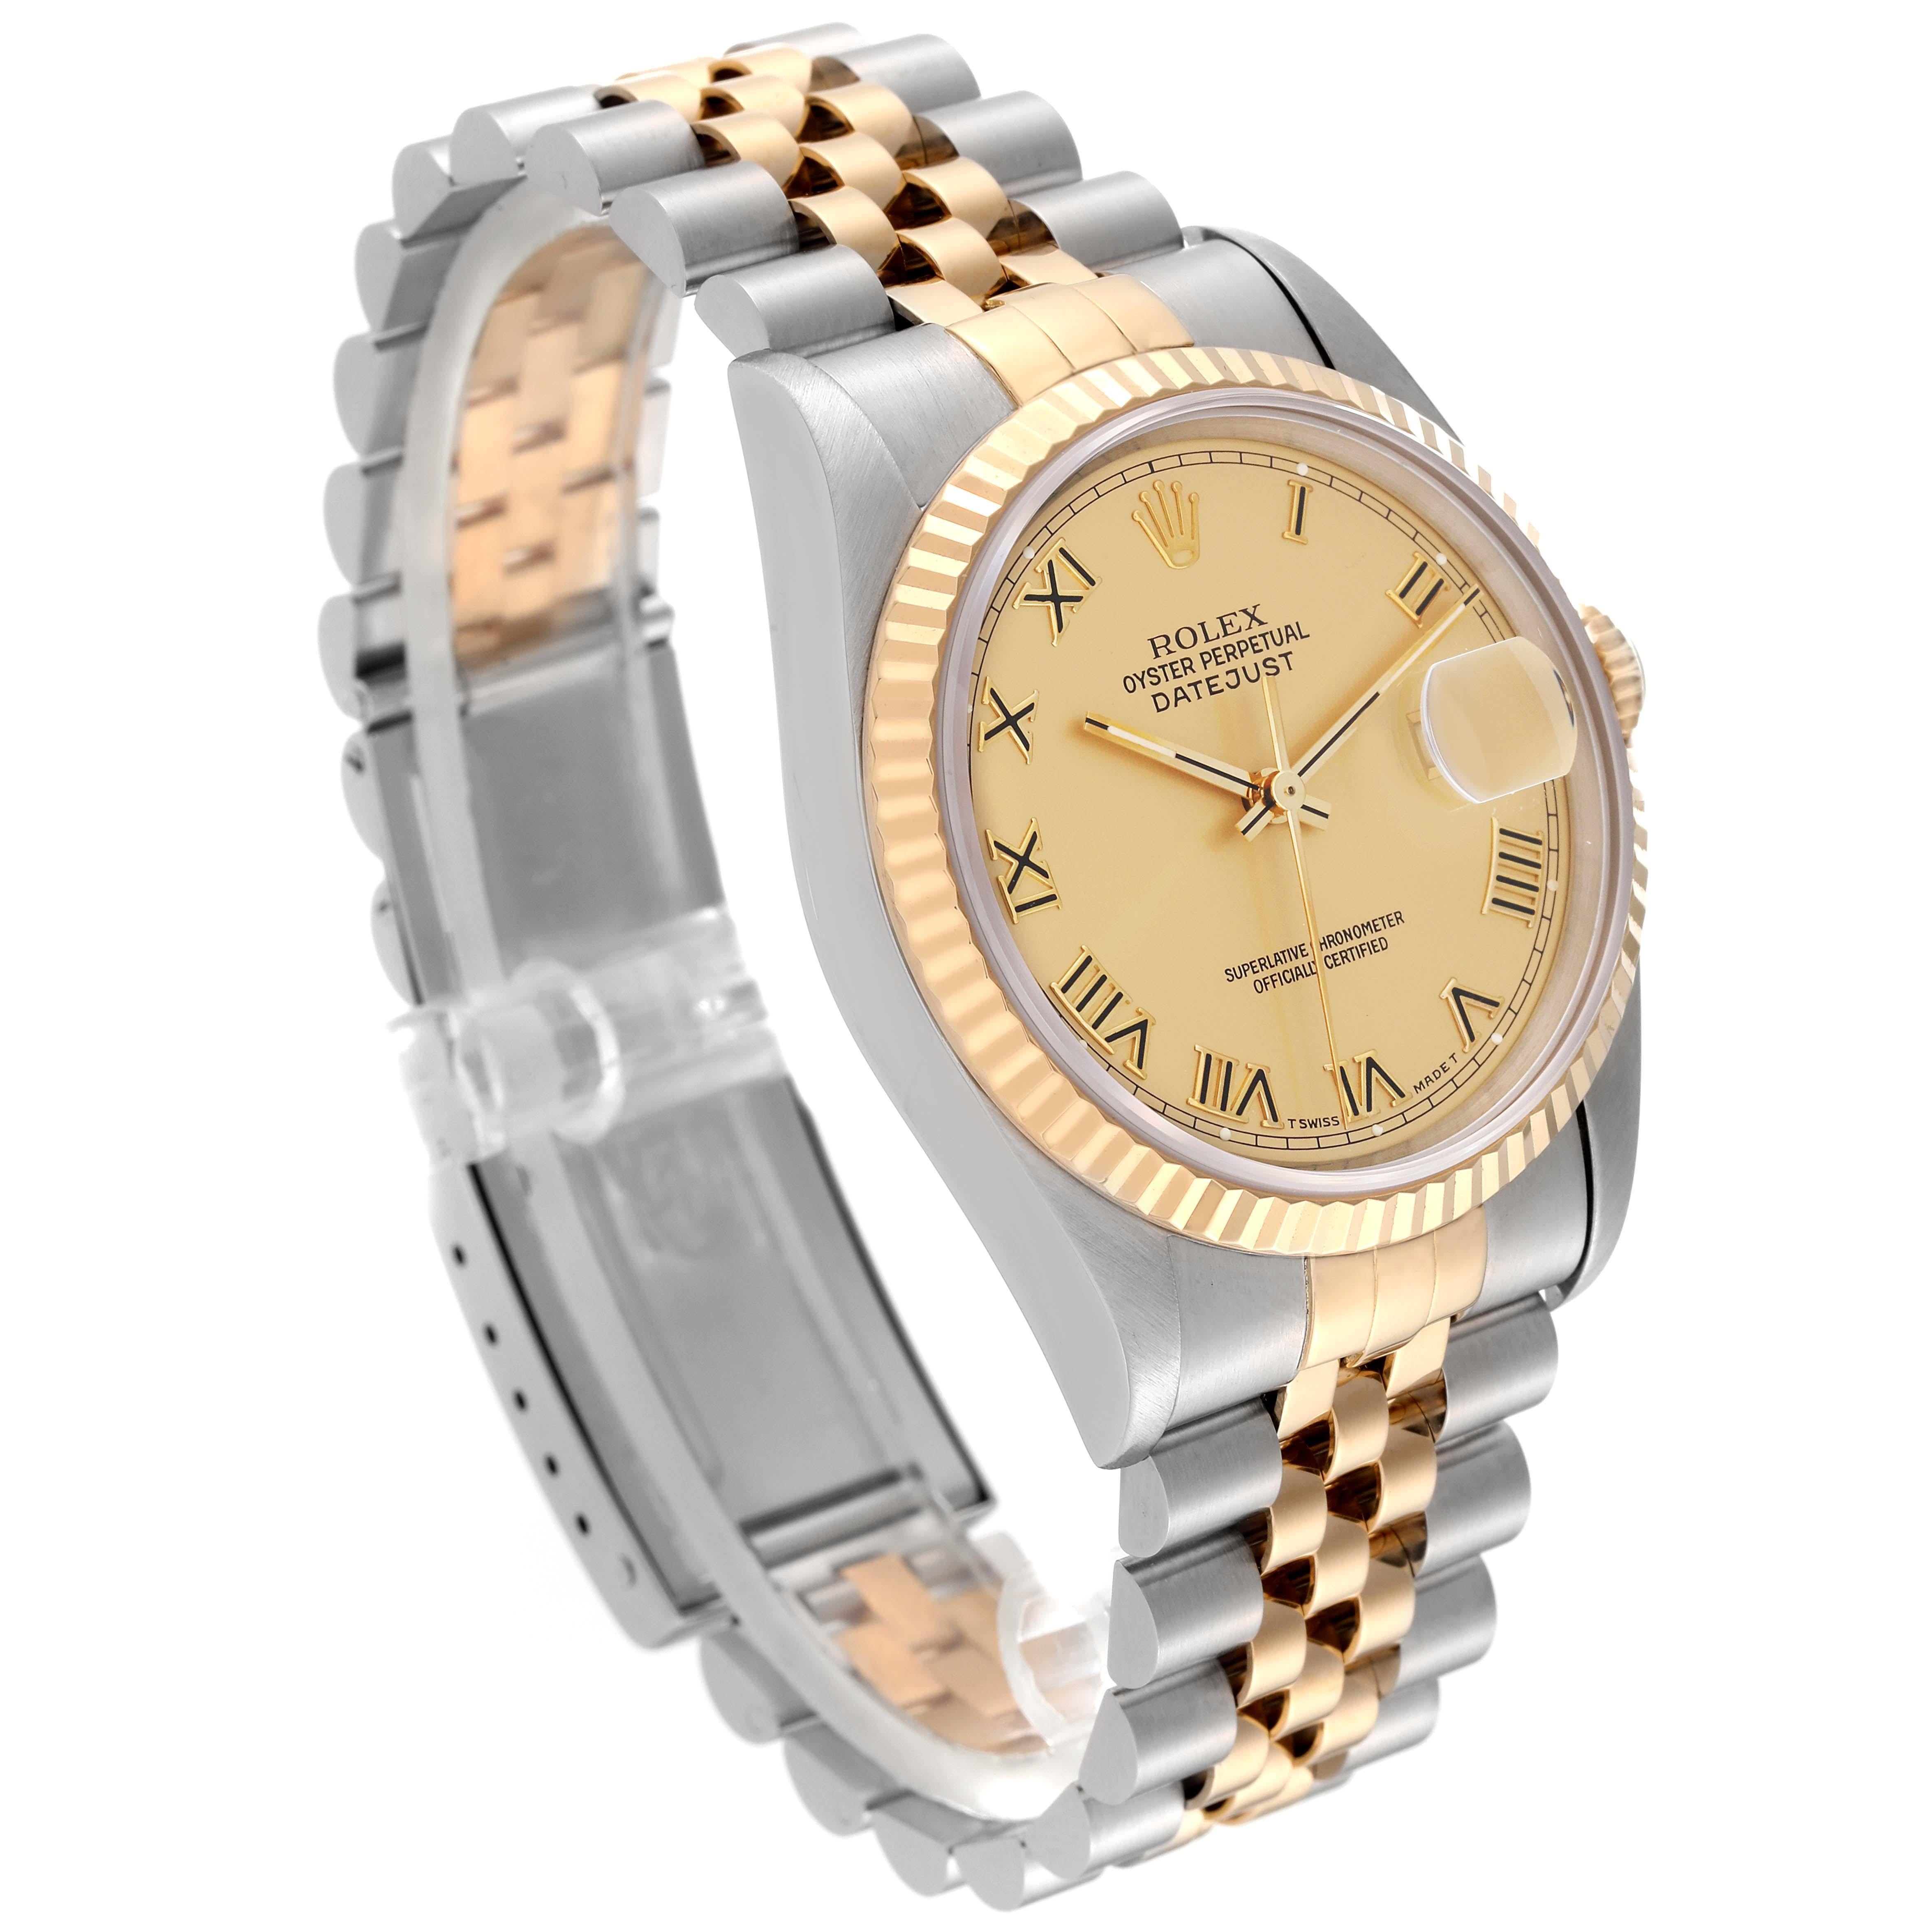 Rolex Datejust Steel Yellow Gold Champagne Dial Mens Watch 16233 For Sale 2